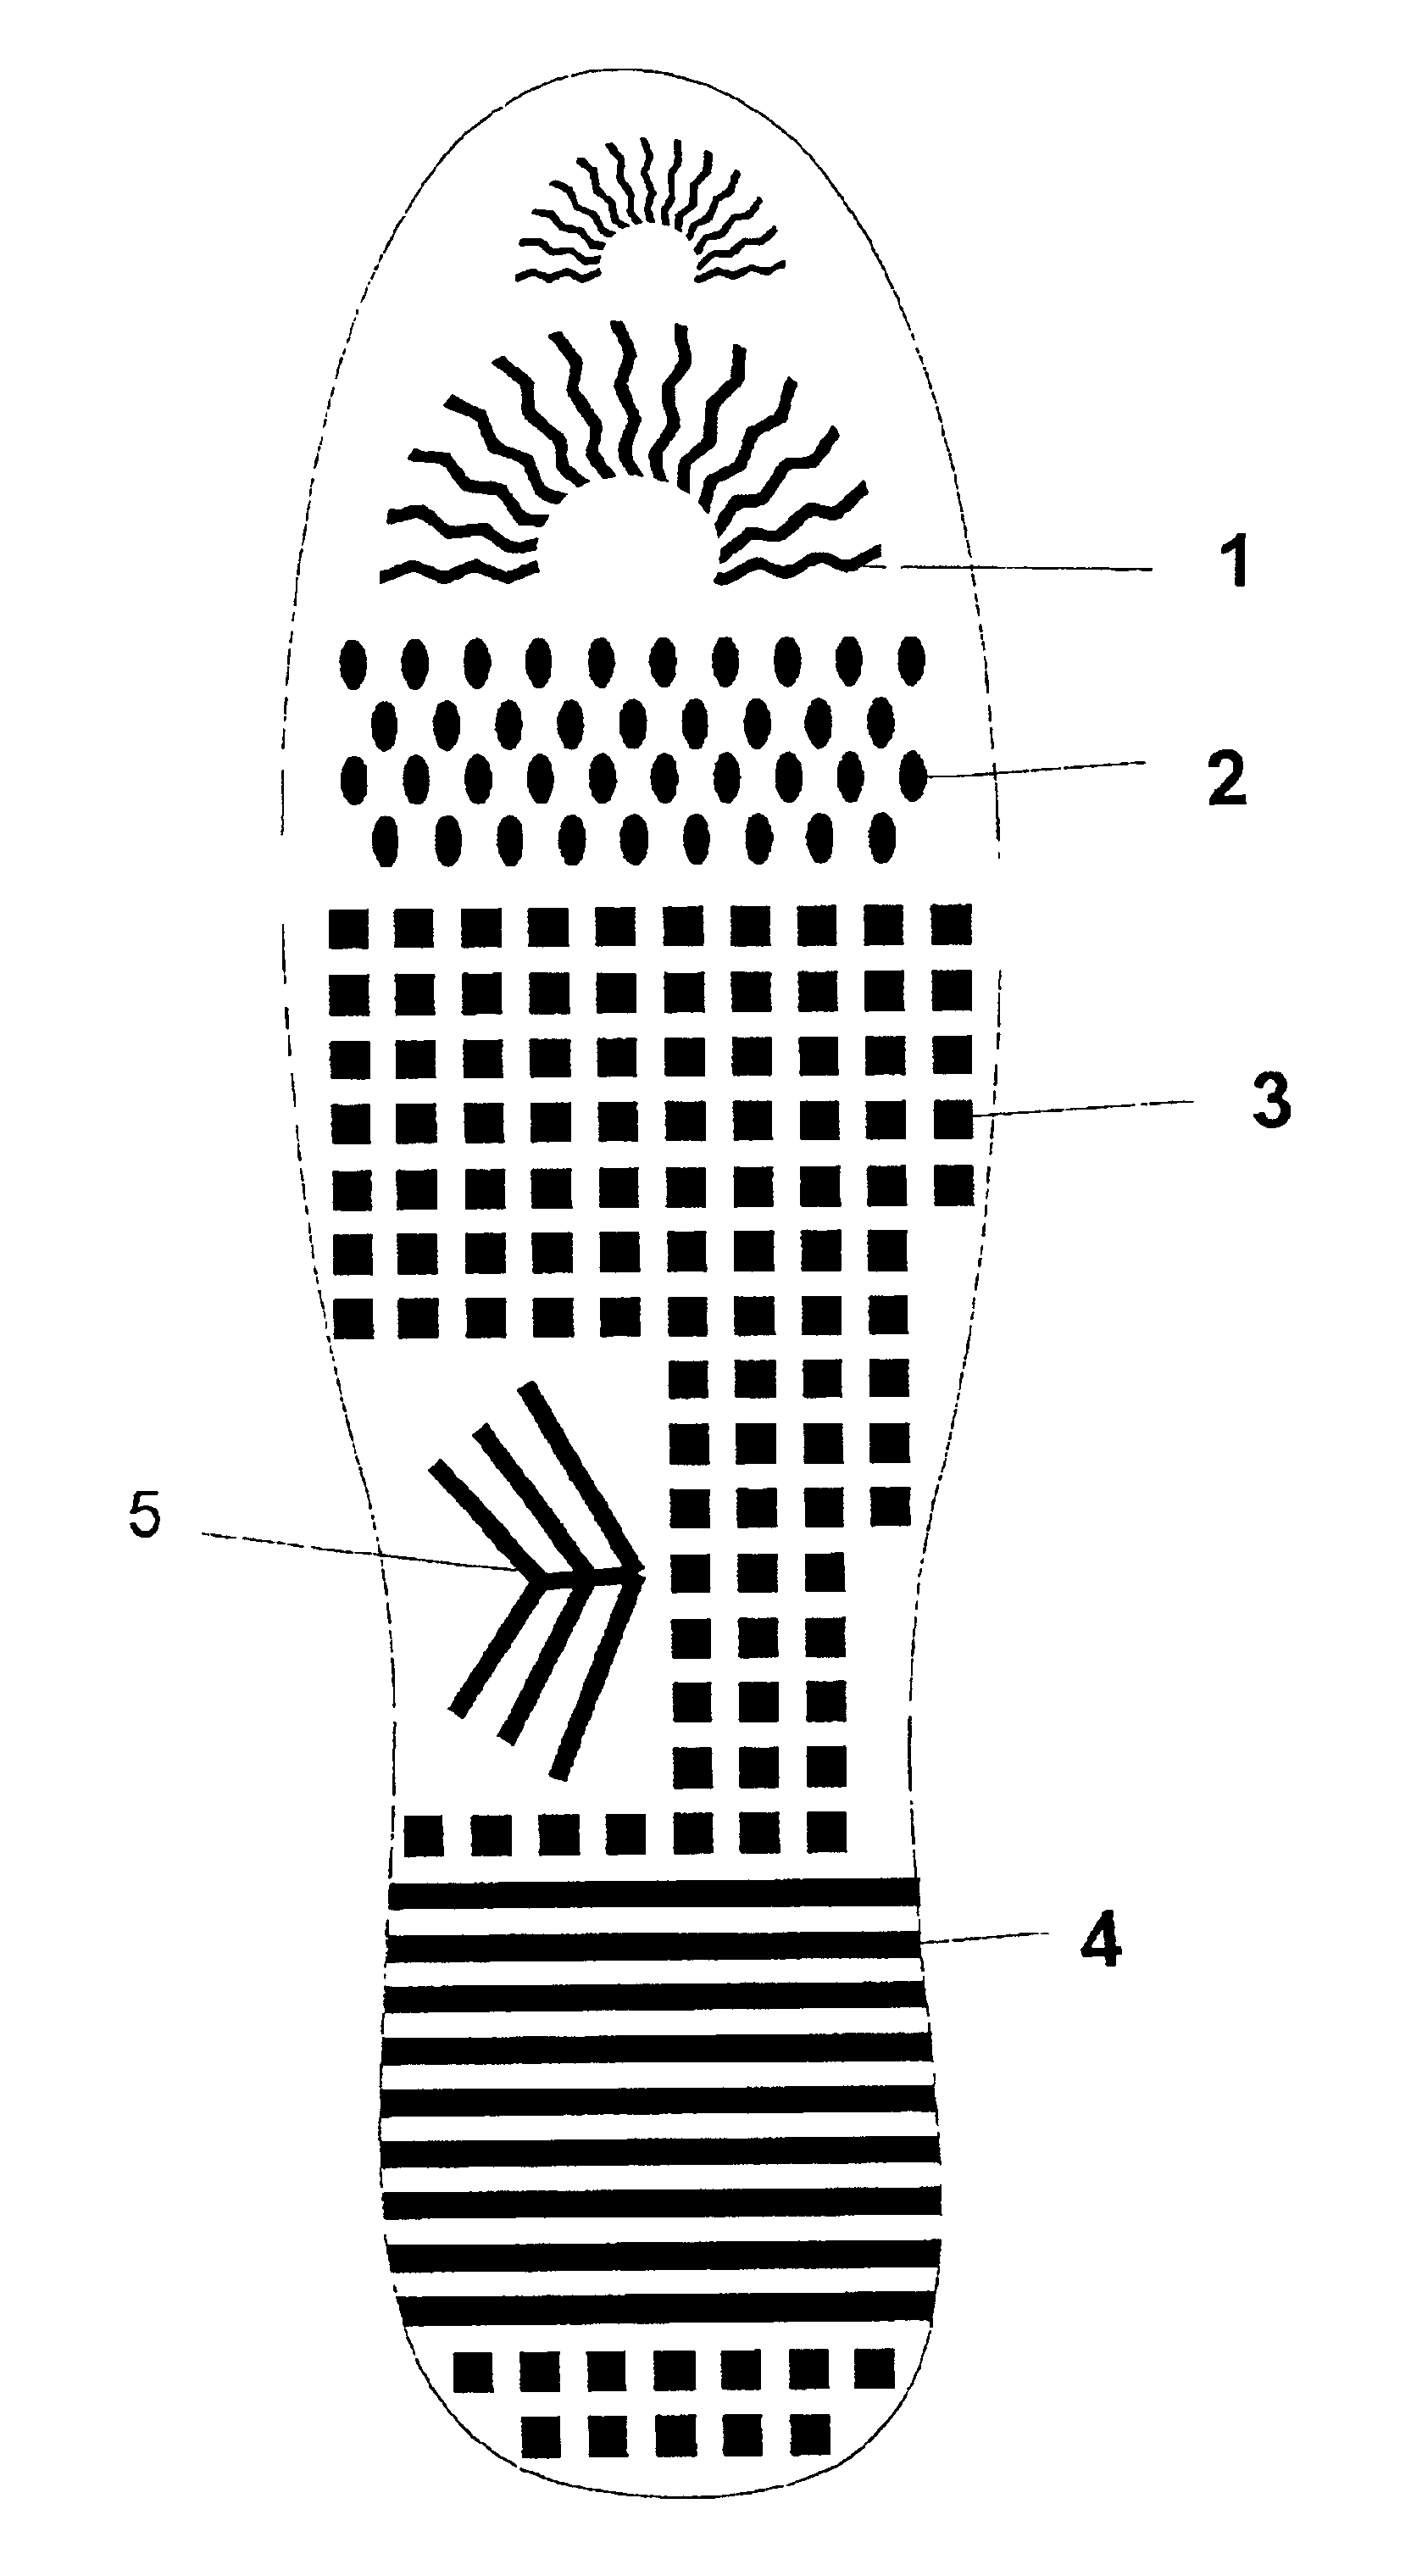 Cushions with non-intersecting-columnar elastomeric members exhibiting compression instability